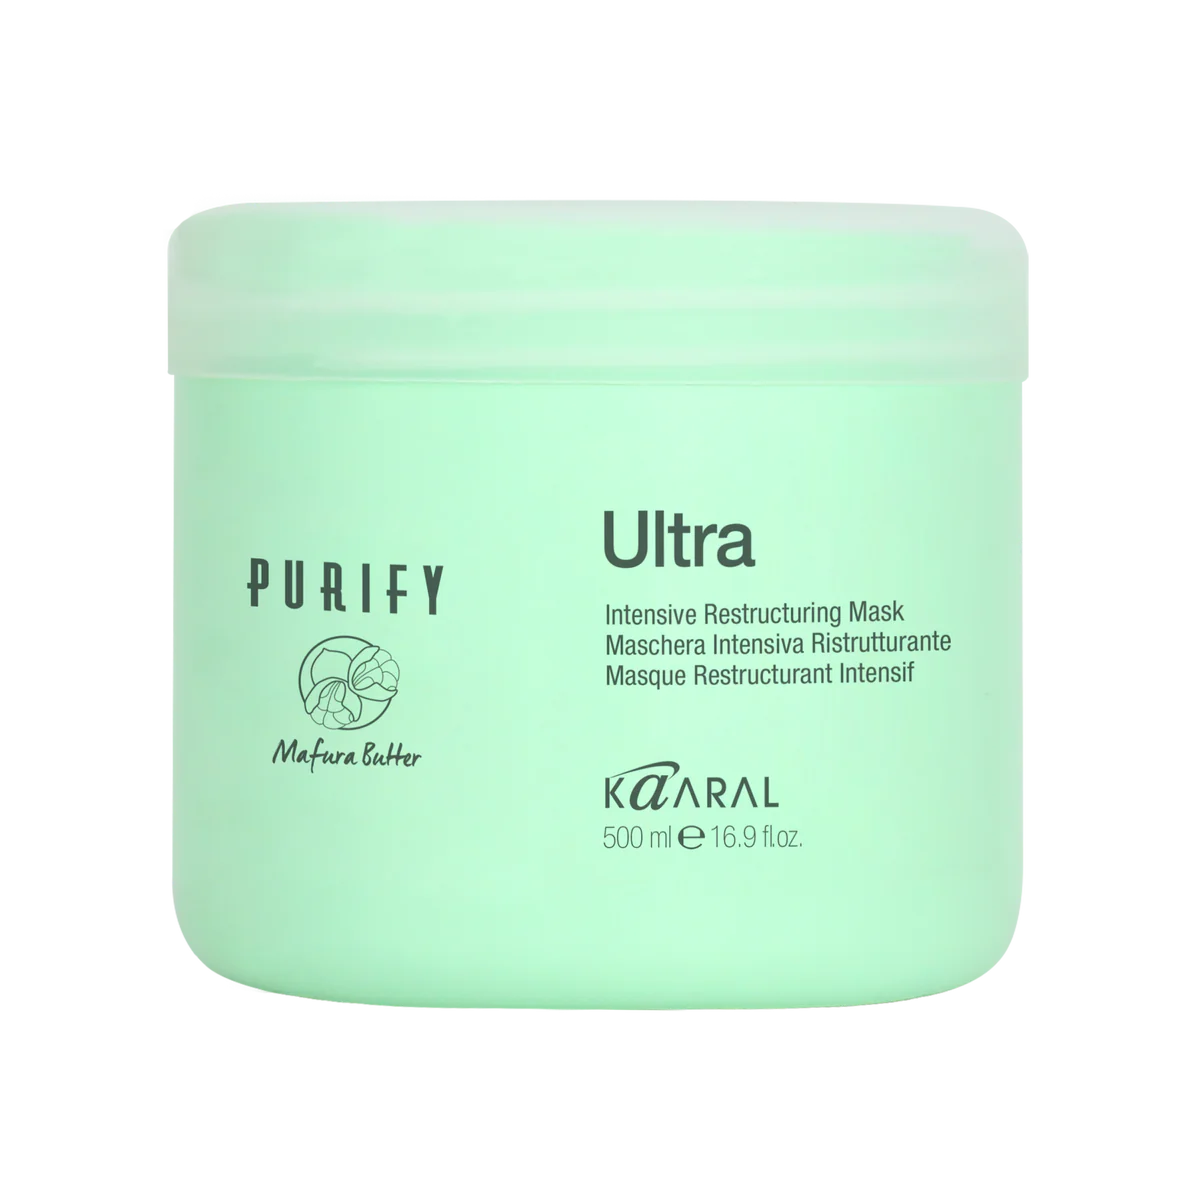 Purify ULTRA Intensive Restructuring Mask